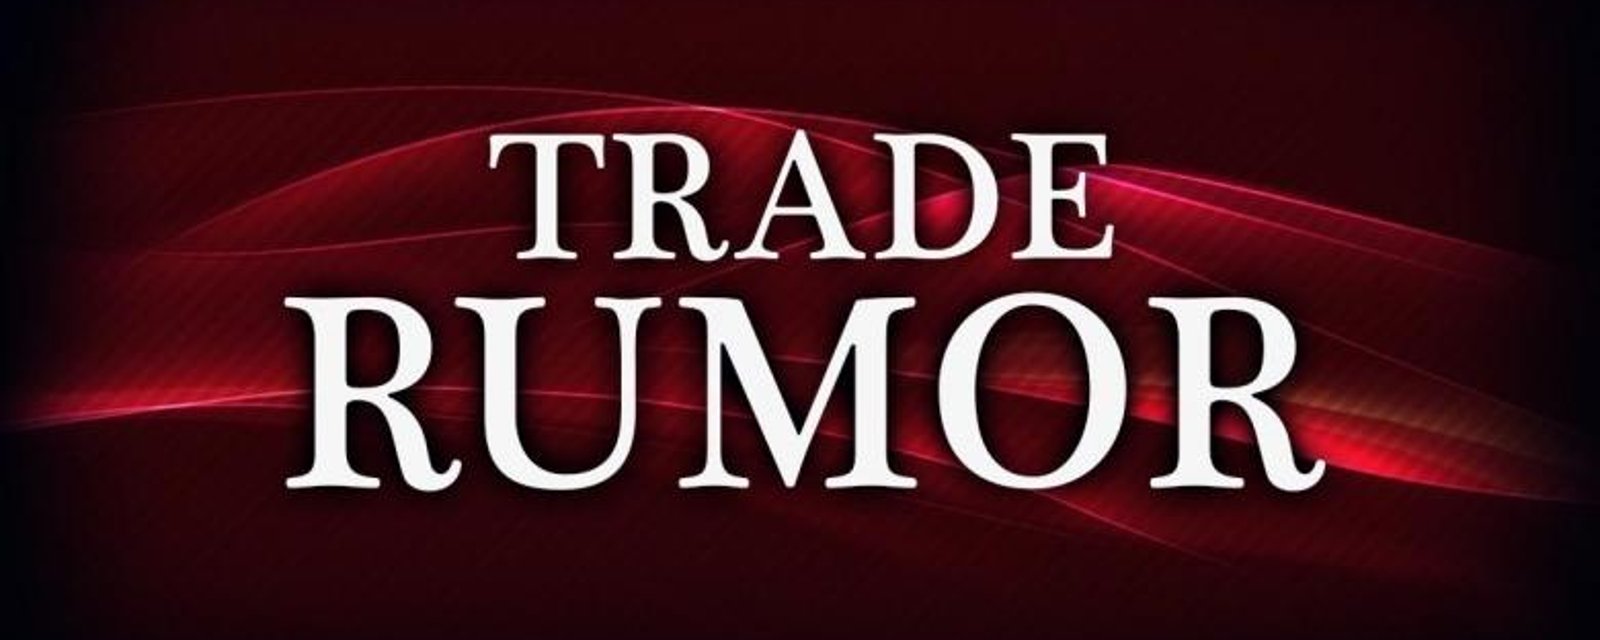 Rumors of a major trade in the next 48 hours.